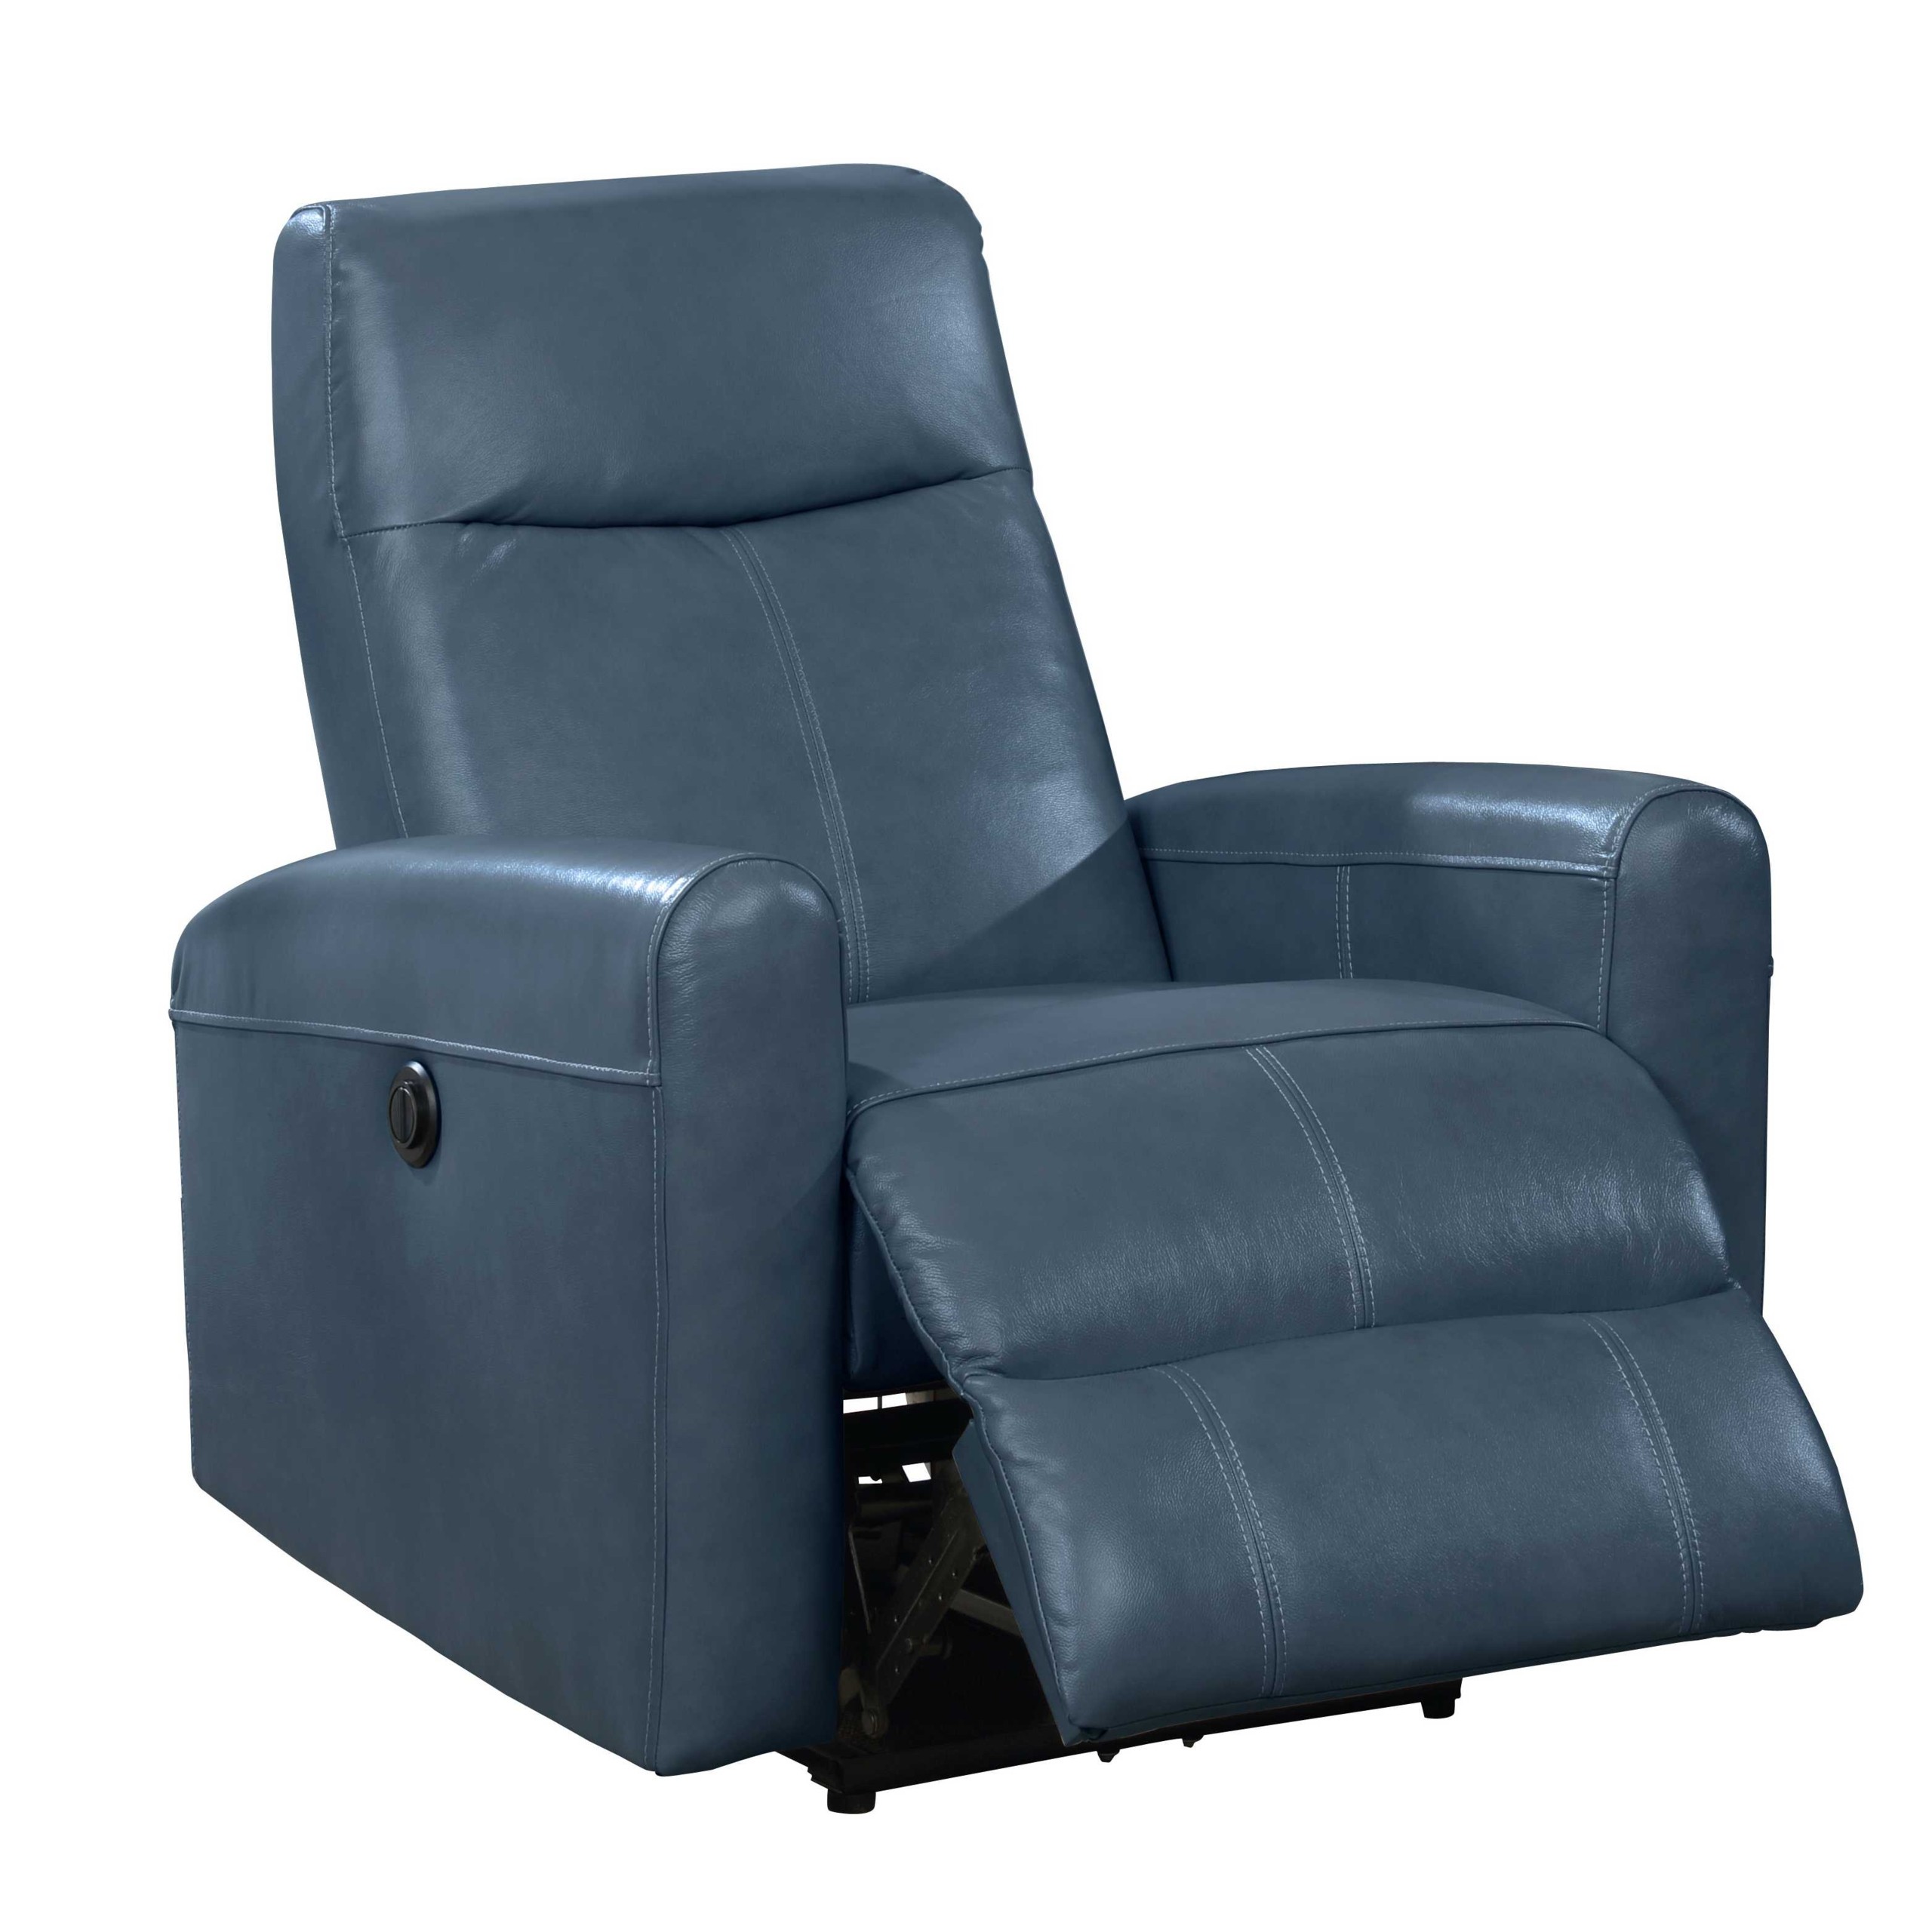 Navy blue contemporary leather upholstered electric